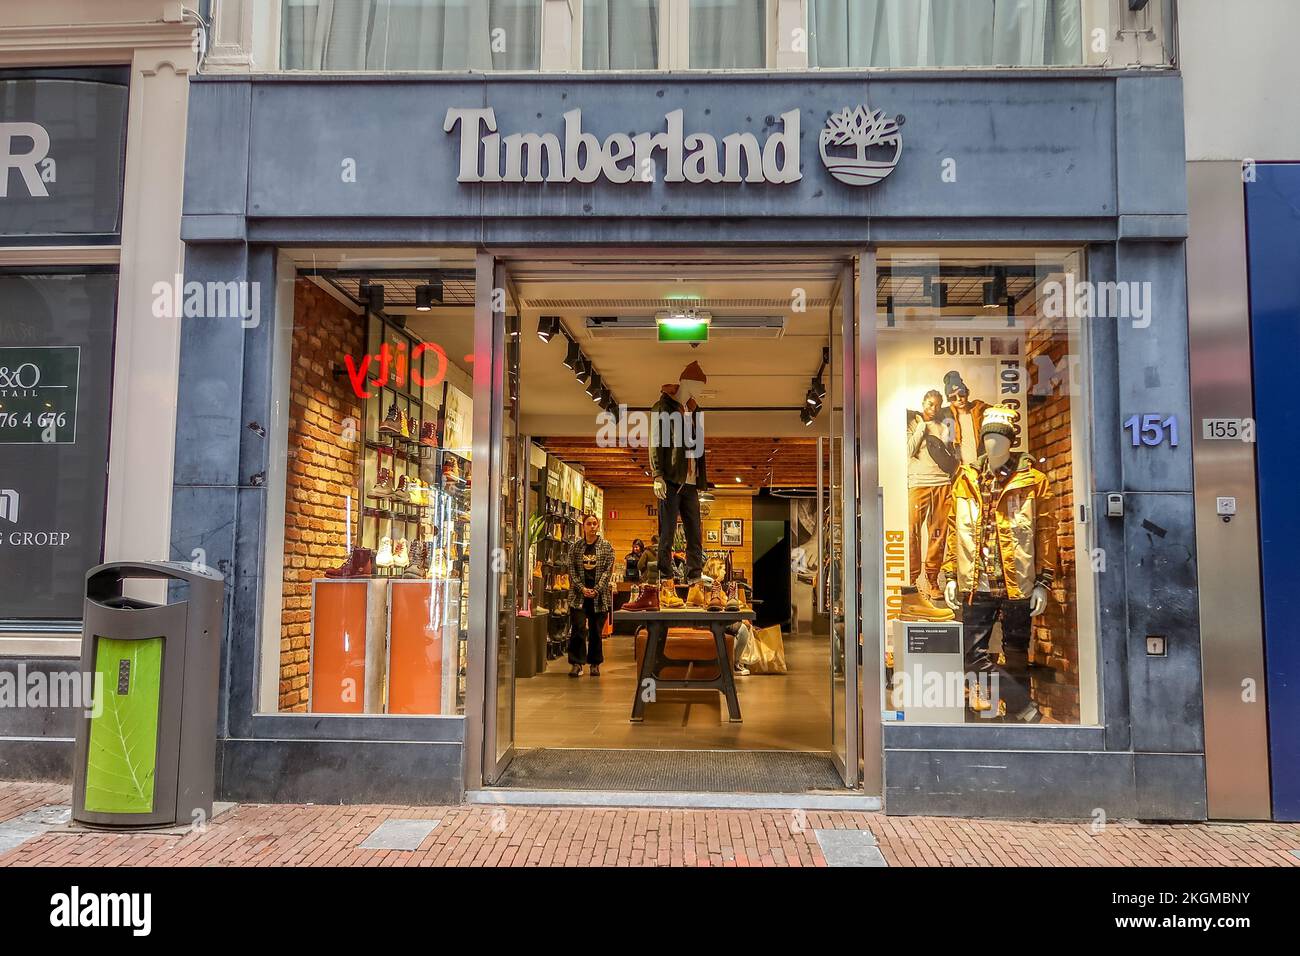 Amsterdam holland street stock photography and images - Alamy